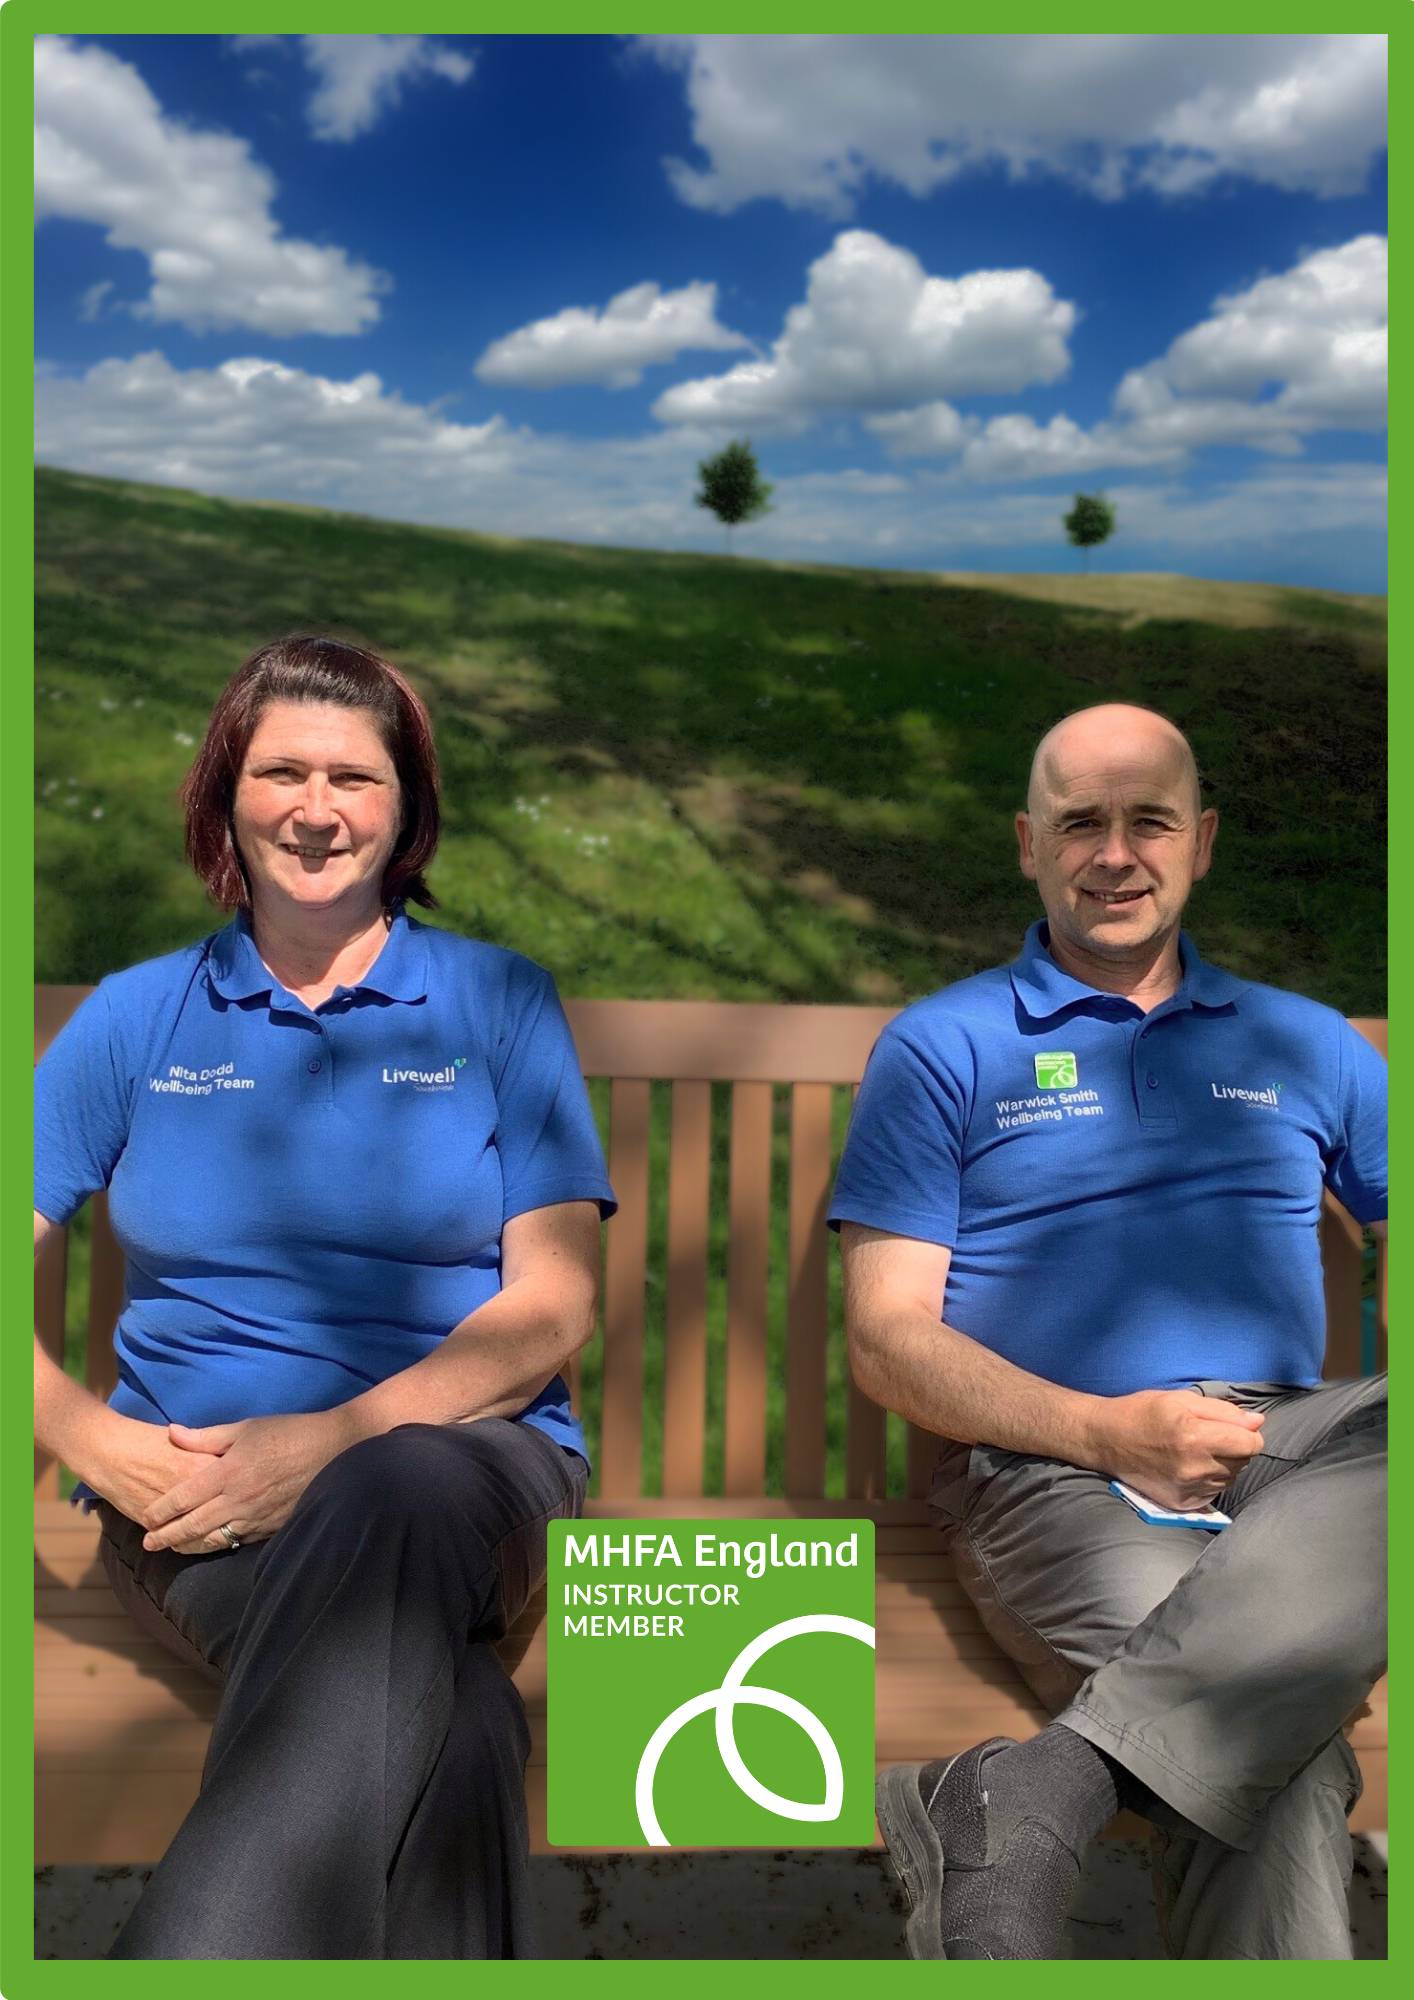 Nita and Warwick sat in a park with MHFA badge inserted